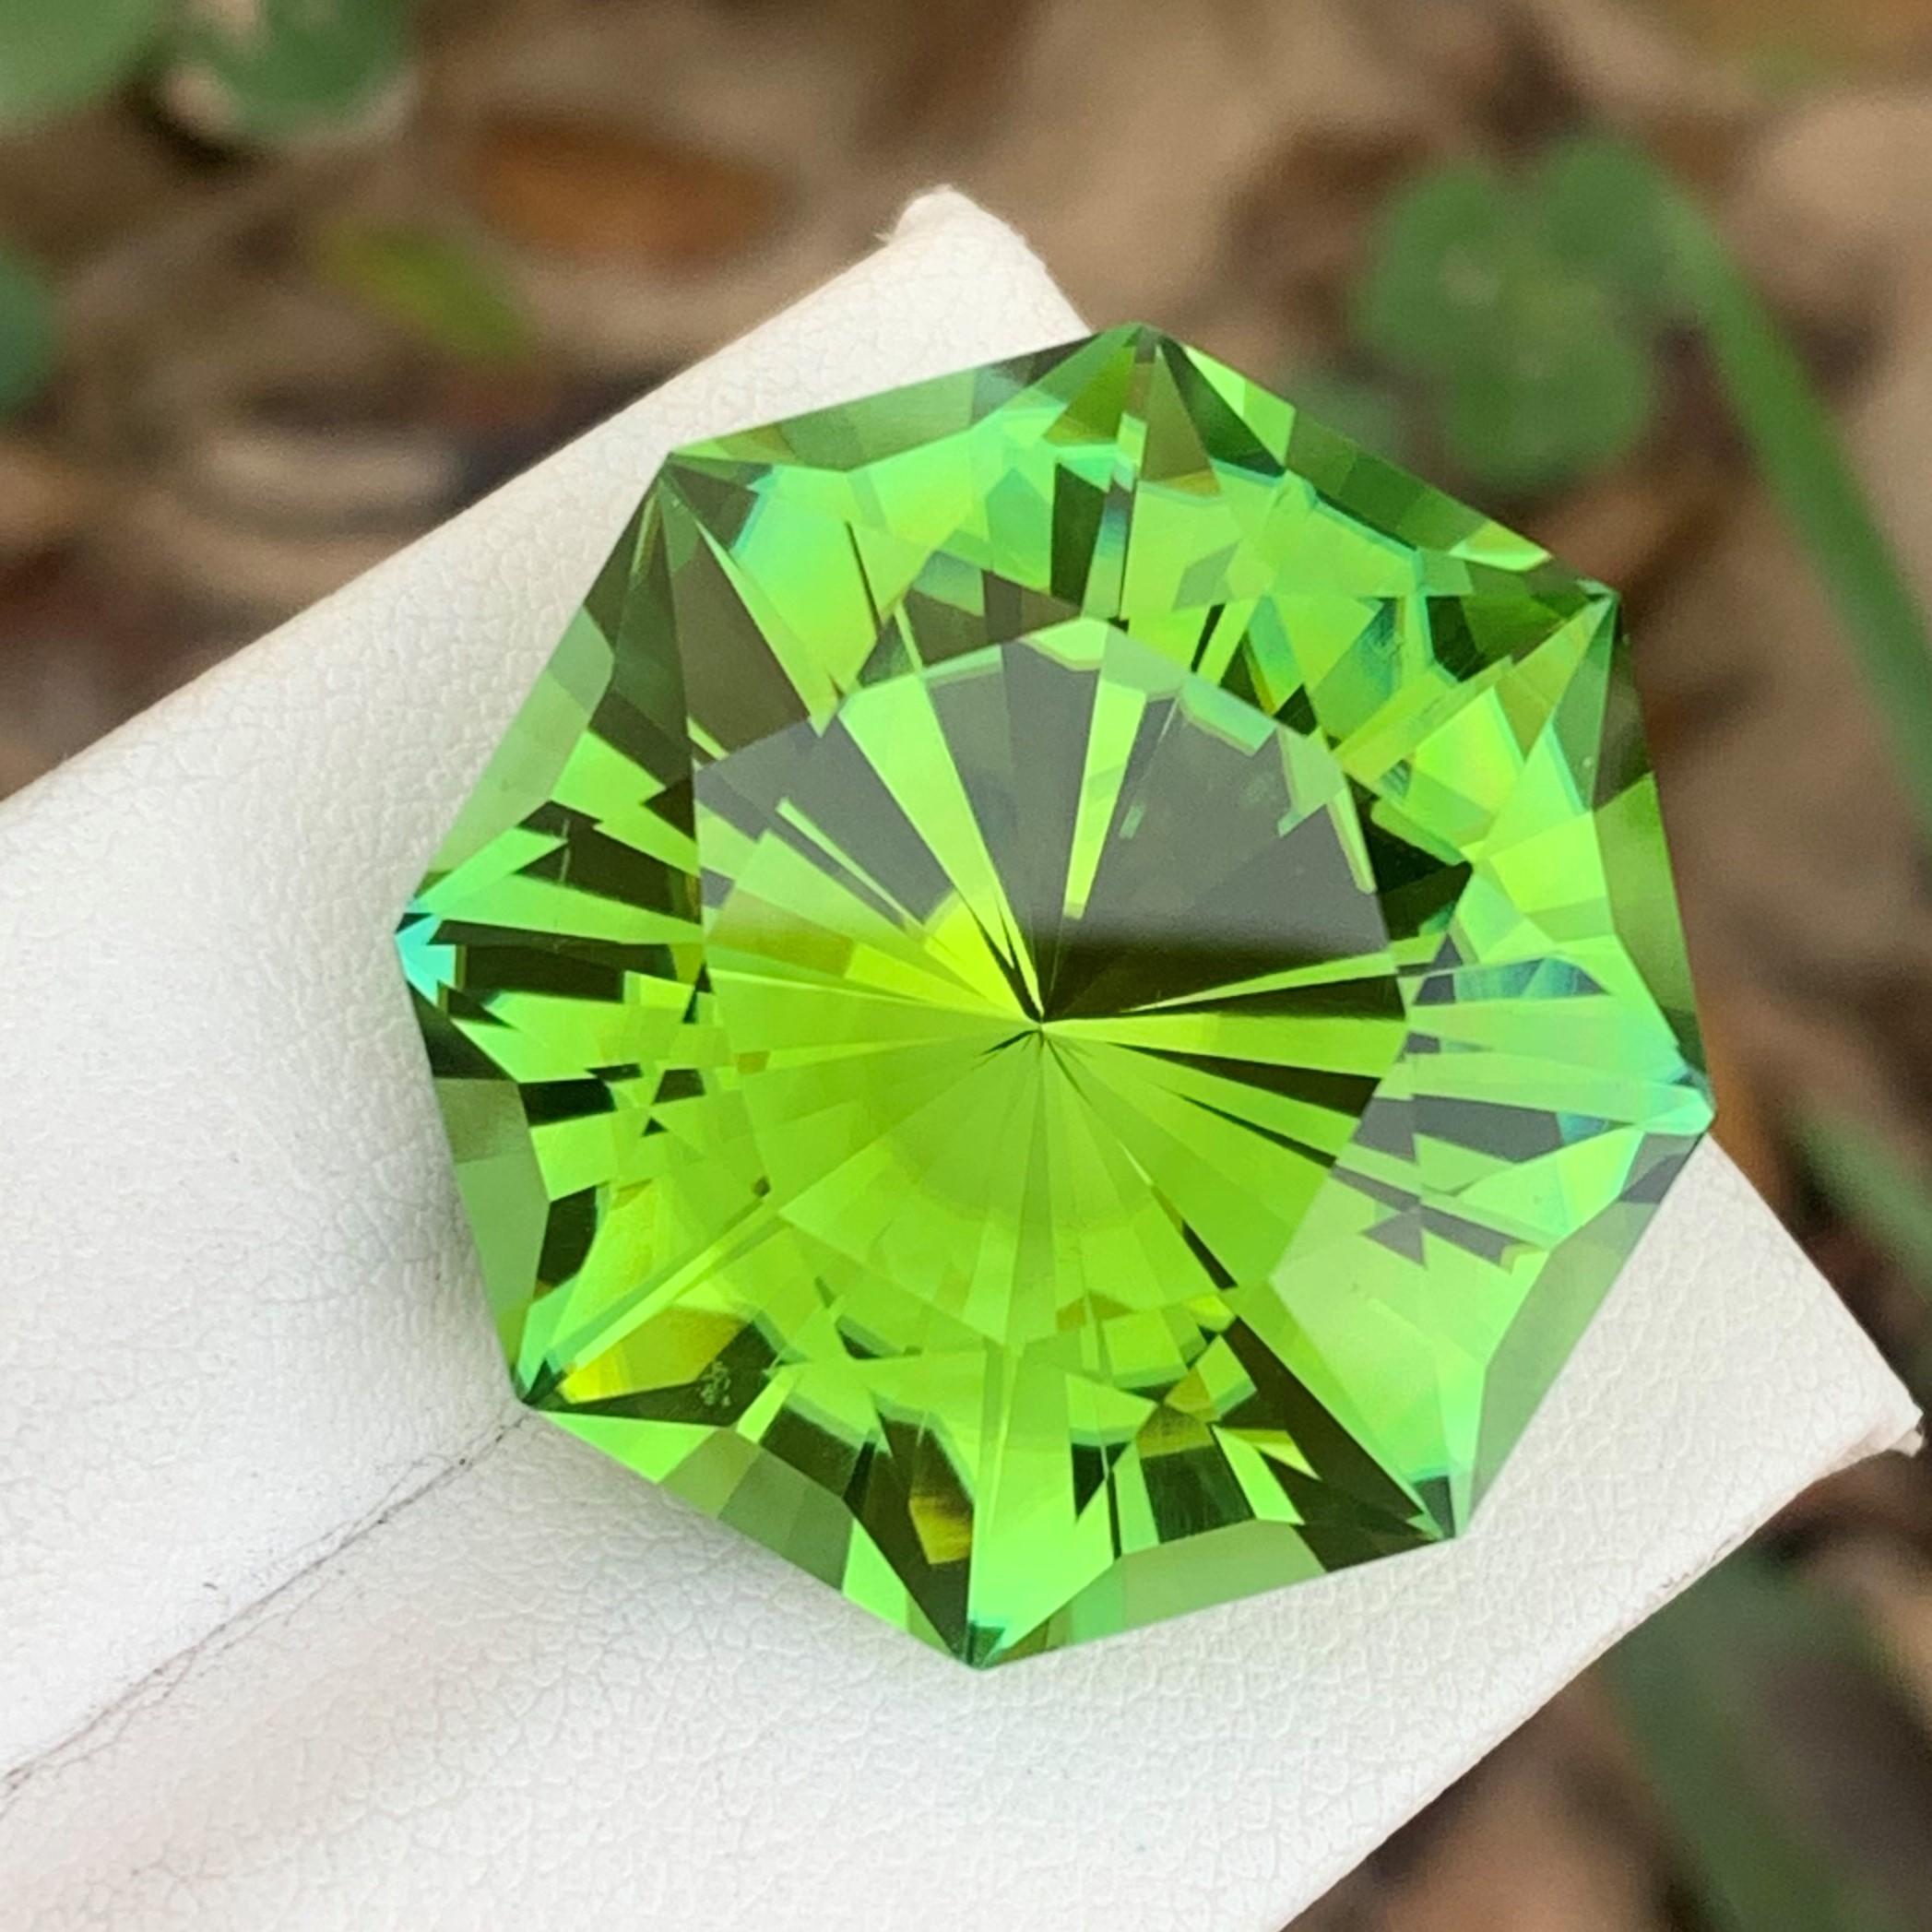 Gemstone Type : Tourmaline
Weight : 48.35 Carats
Dimensions : 24x24x15.1 Mm
Origin : Affrica 
Clarity : Loupe Clean
Shape: Octagon 
Color: Bright Green
Certificate: On Demand
Basically, mint tourmalines are tourmalines with pastel hues of light